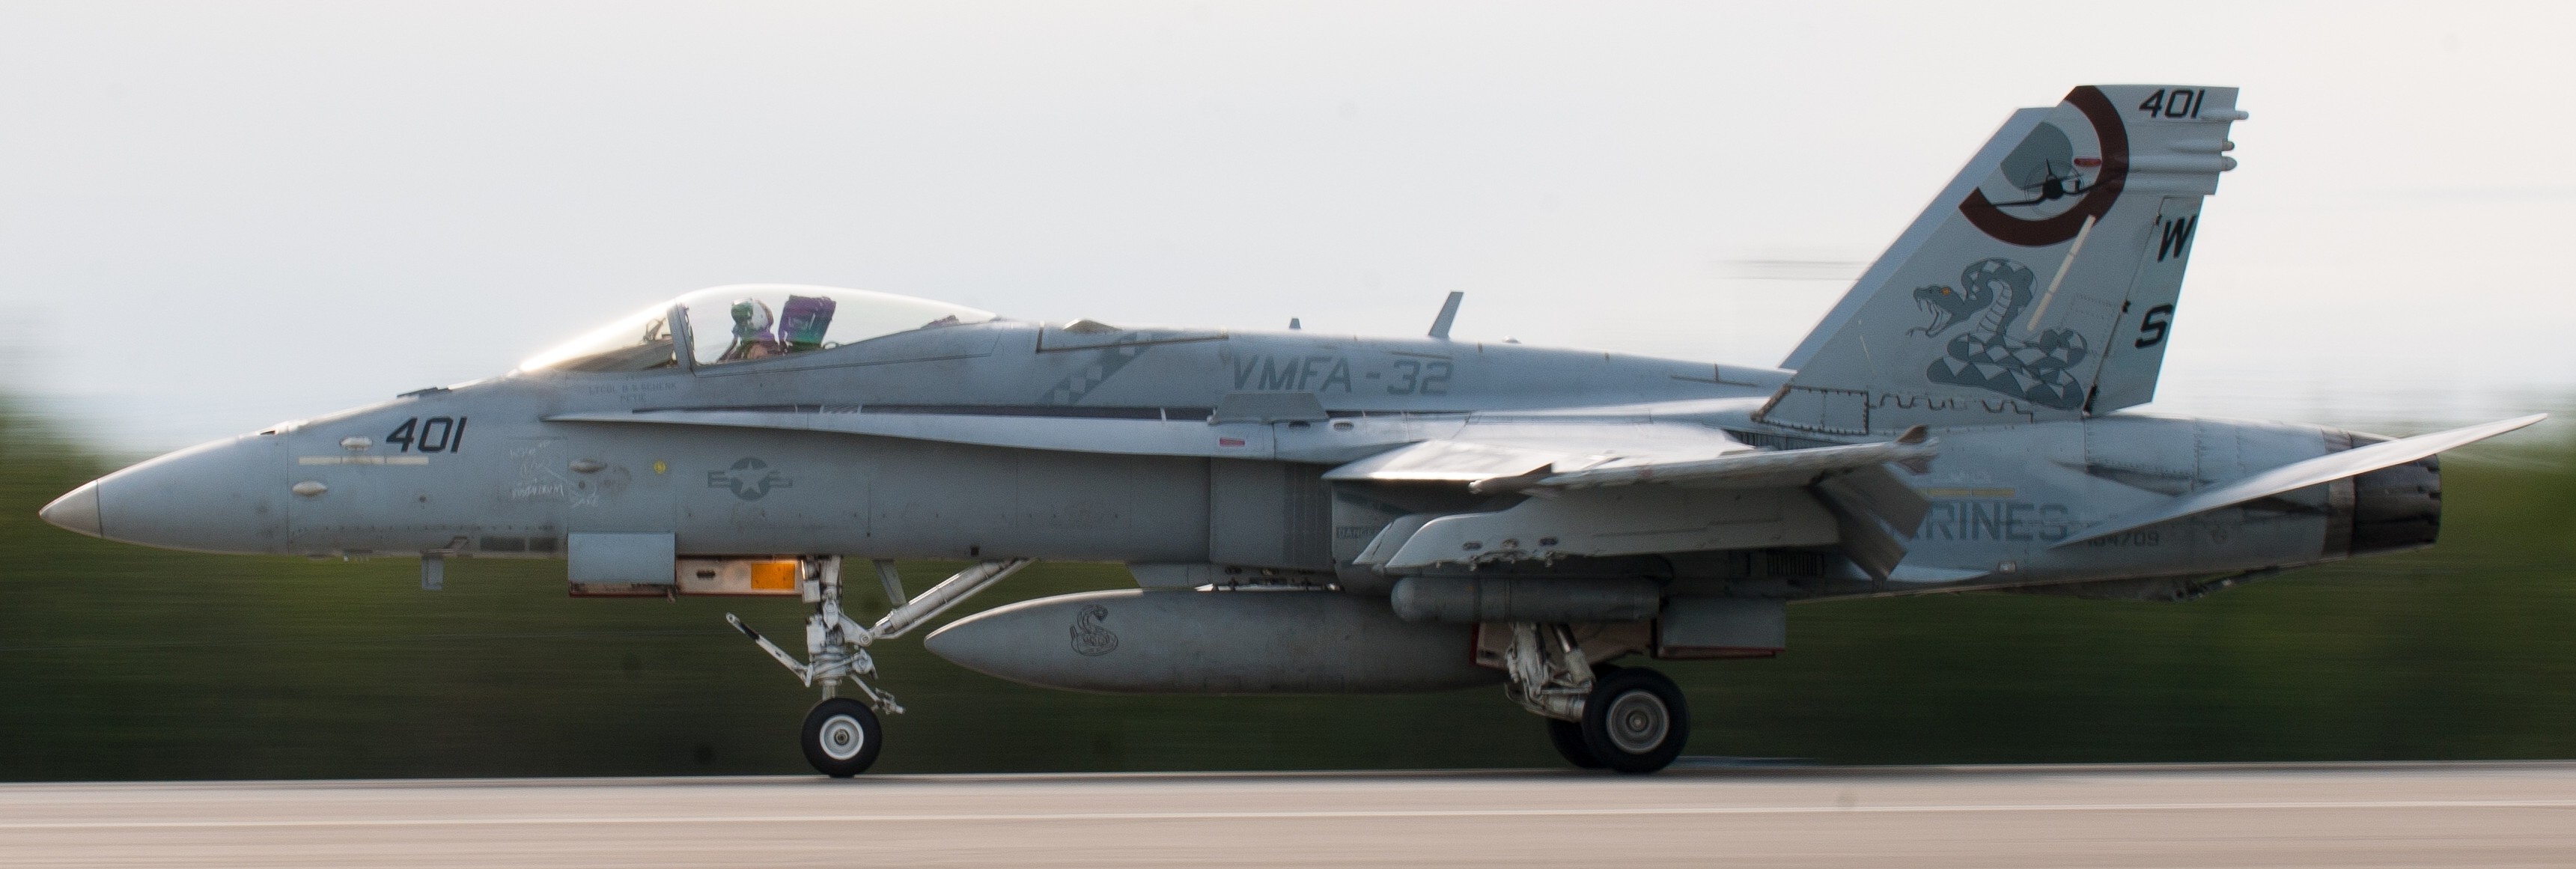 vmfa-323 death rattlers marine fighter attack squadron f/a-18c hornet 156 eielson air force base afb alaska